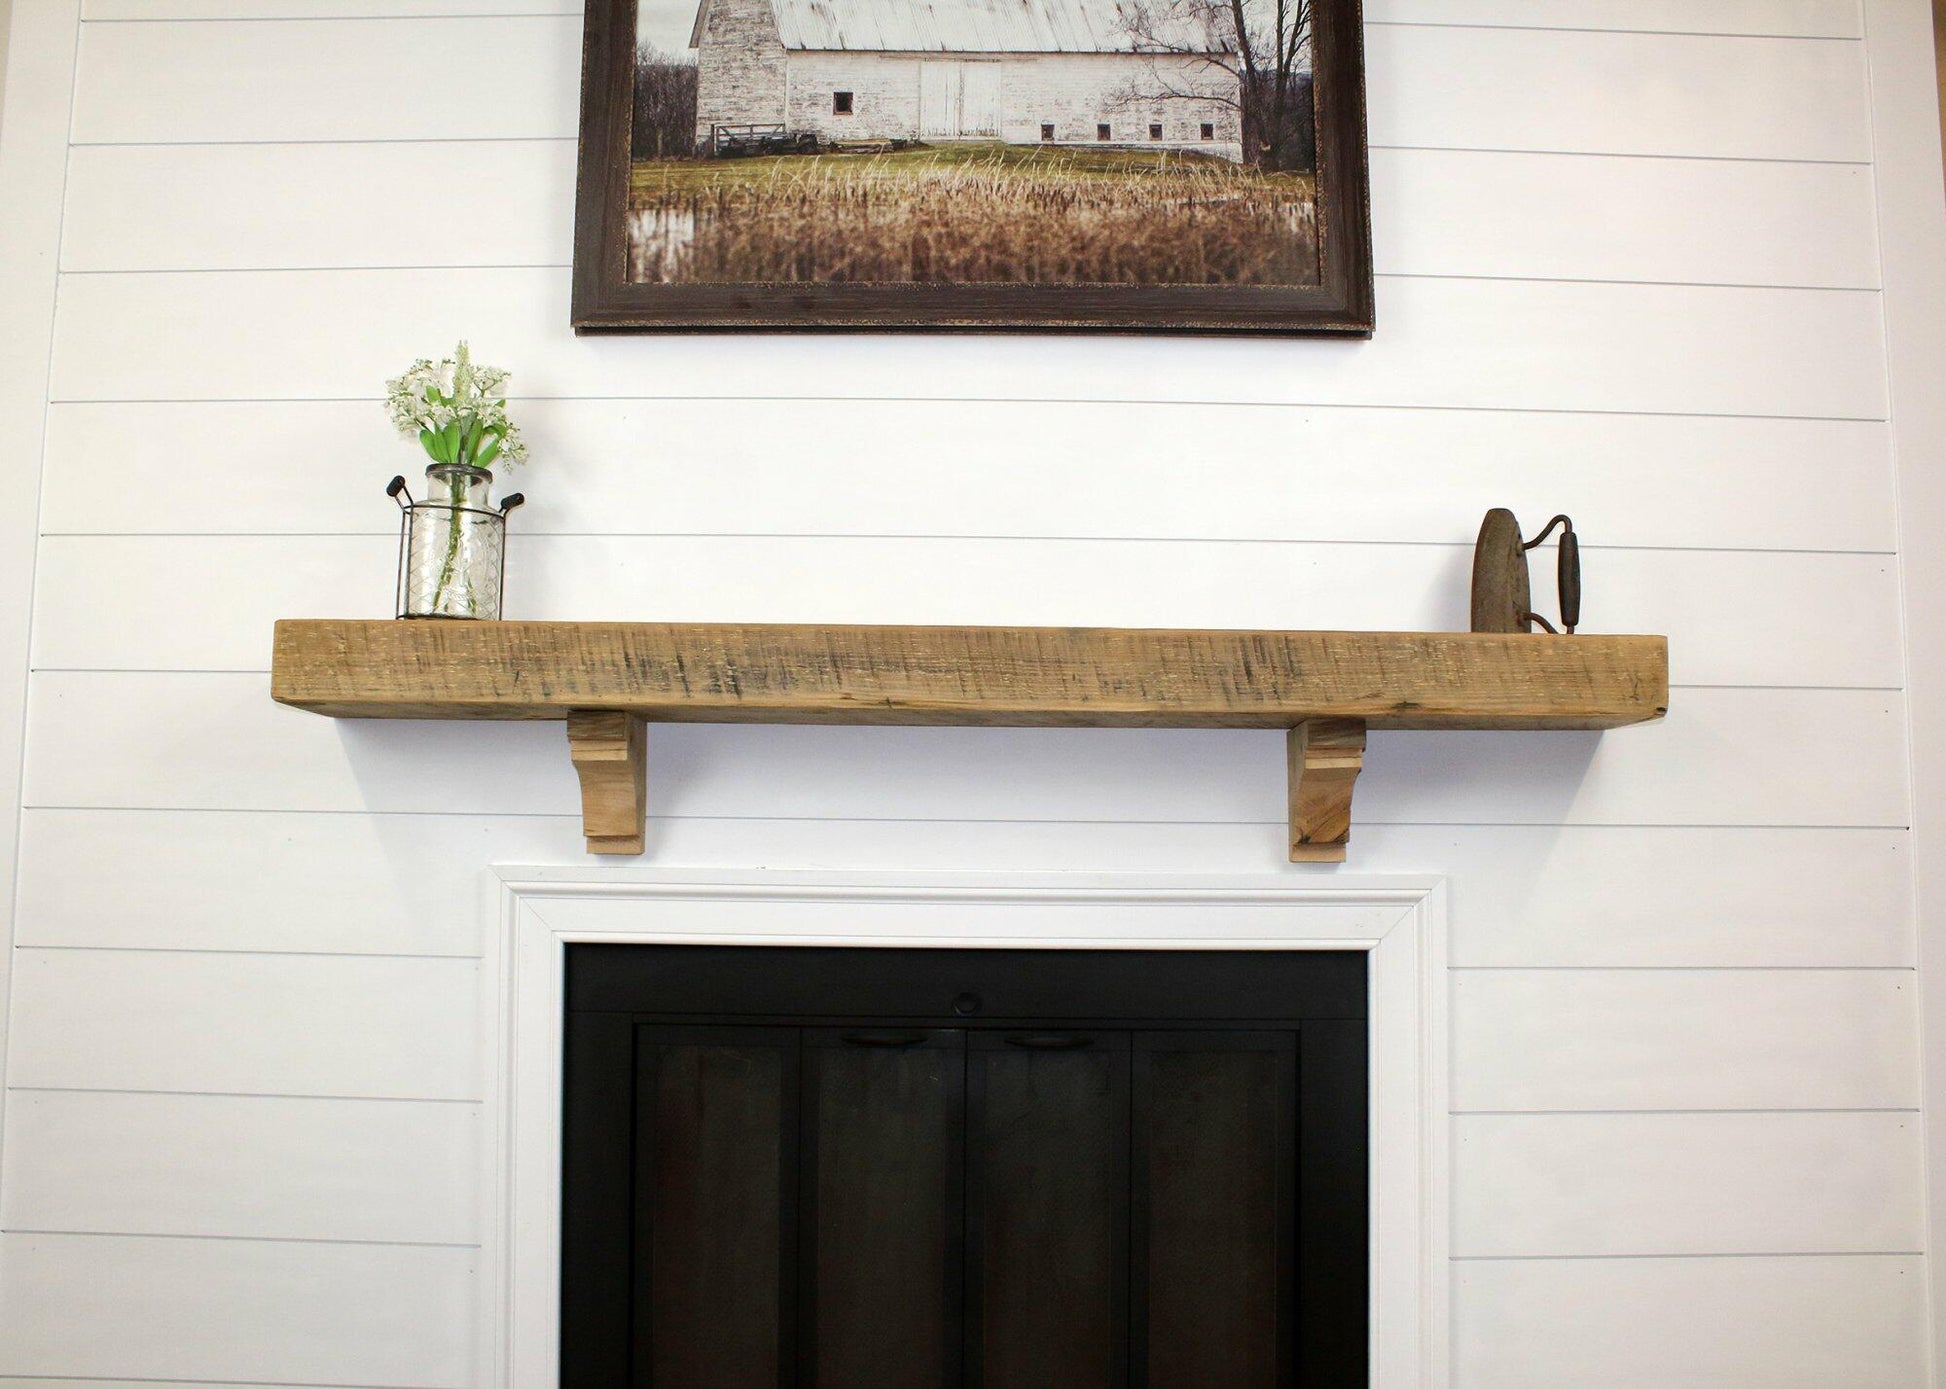 a reclaimed wood floating fireplace mantel in the natural option. The mantel has matching corbels shown underneath and has prominent saw markings in the face.